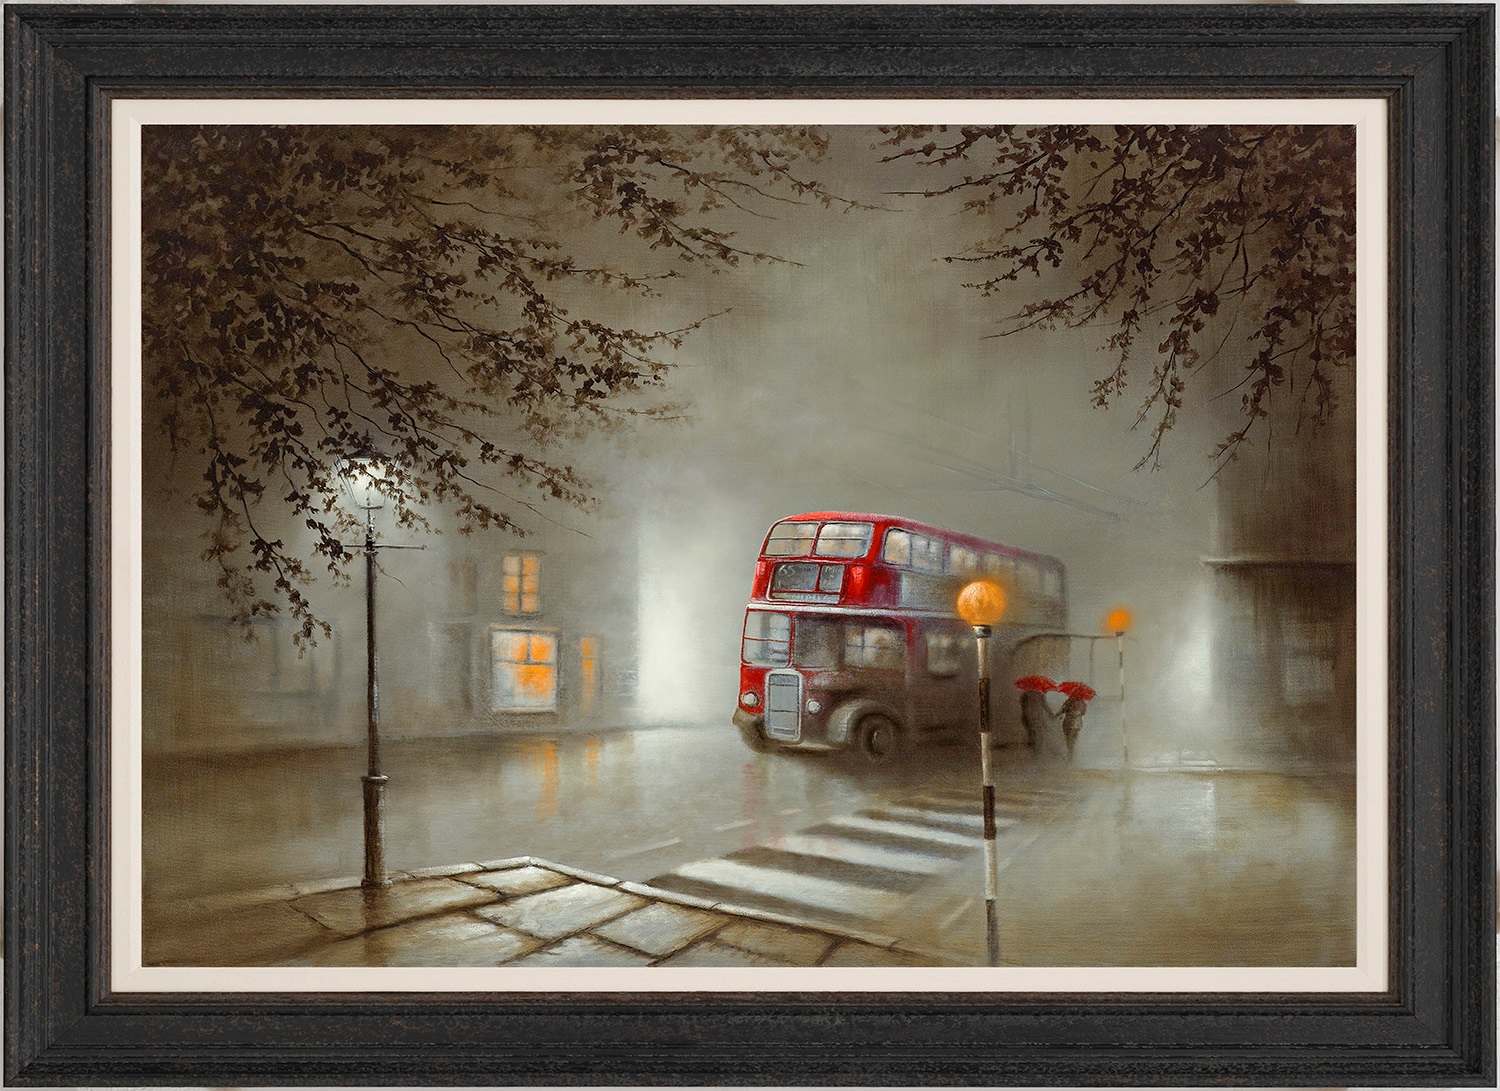 Is This Love? by Bob Barker, Transport | Love | Romance | Couple